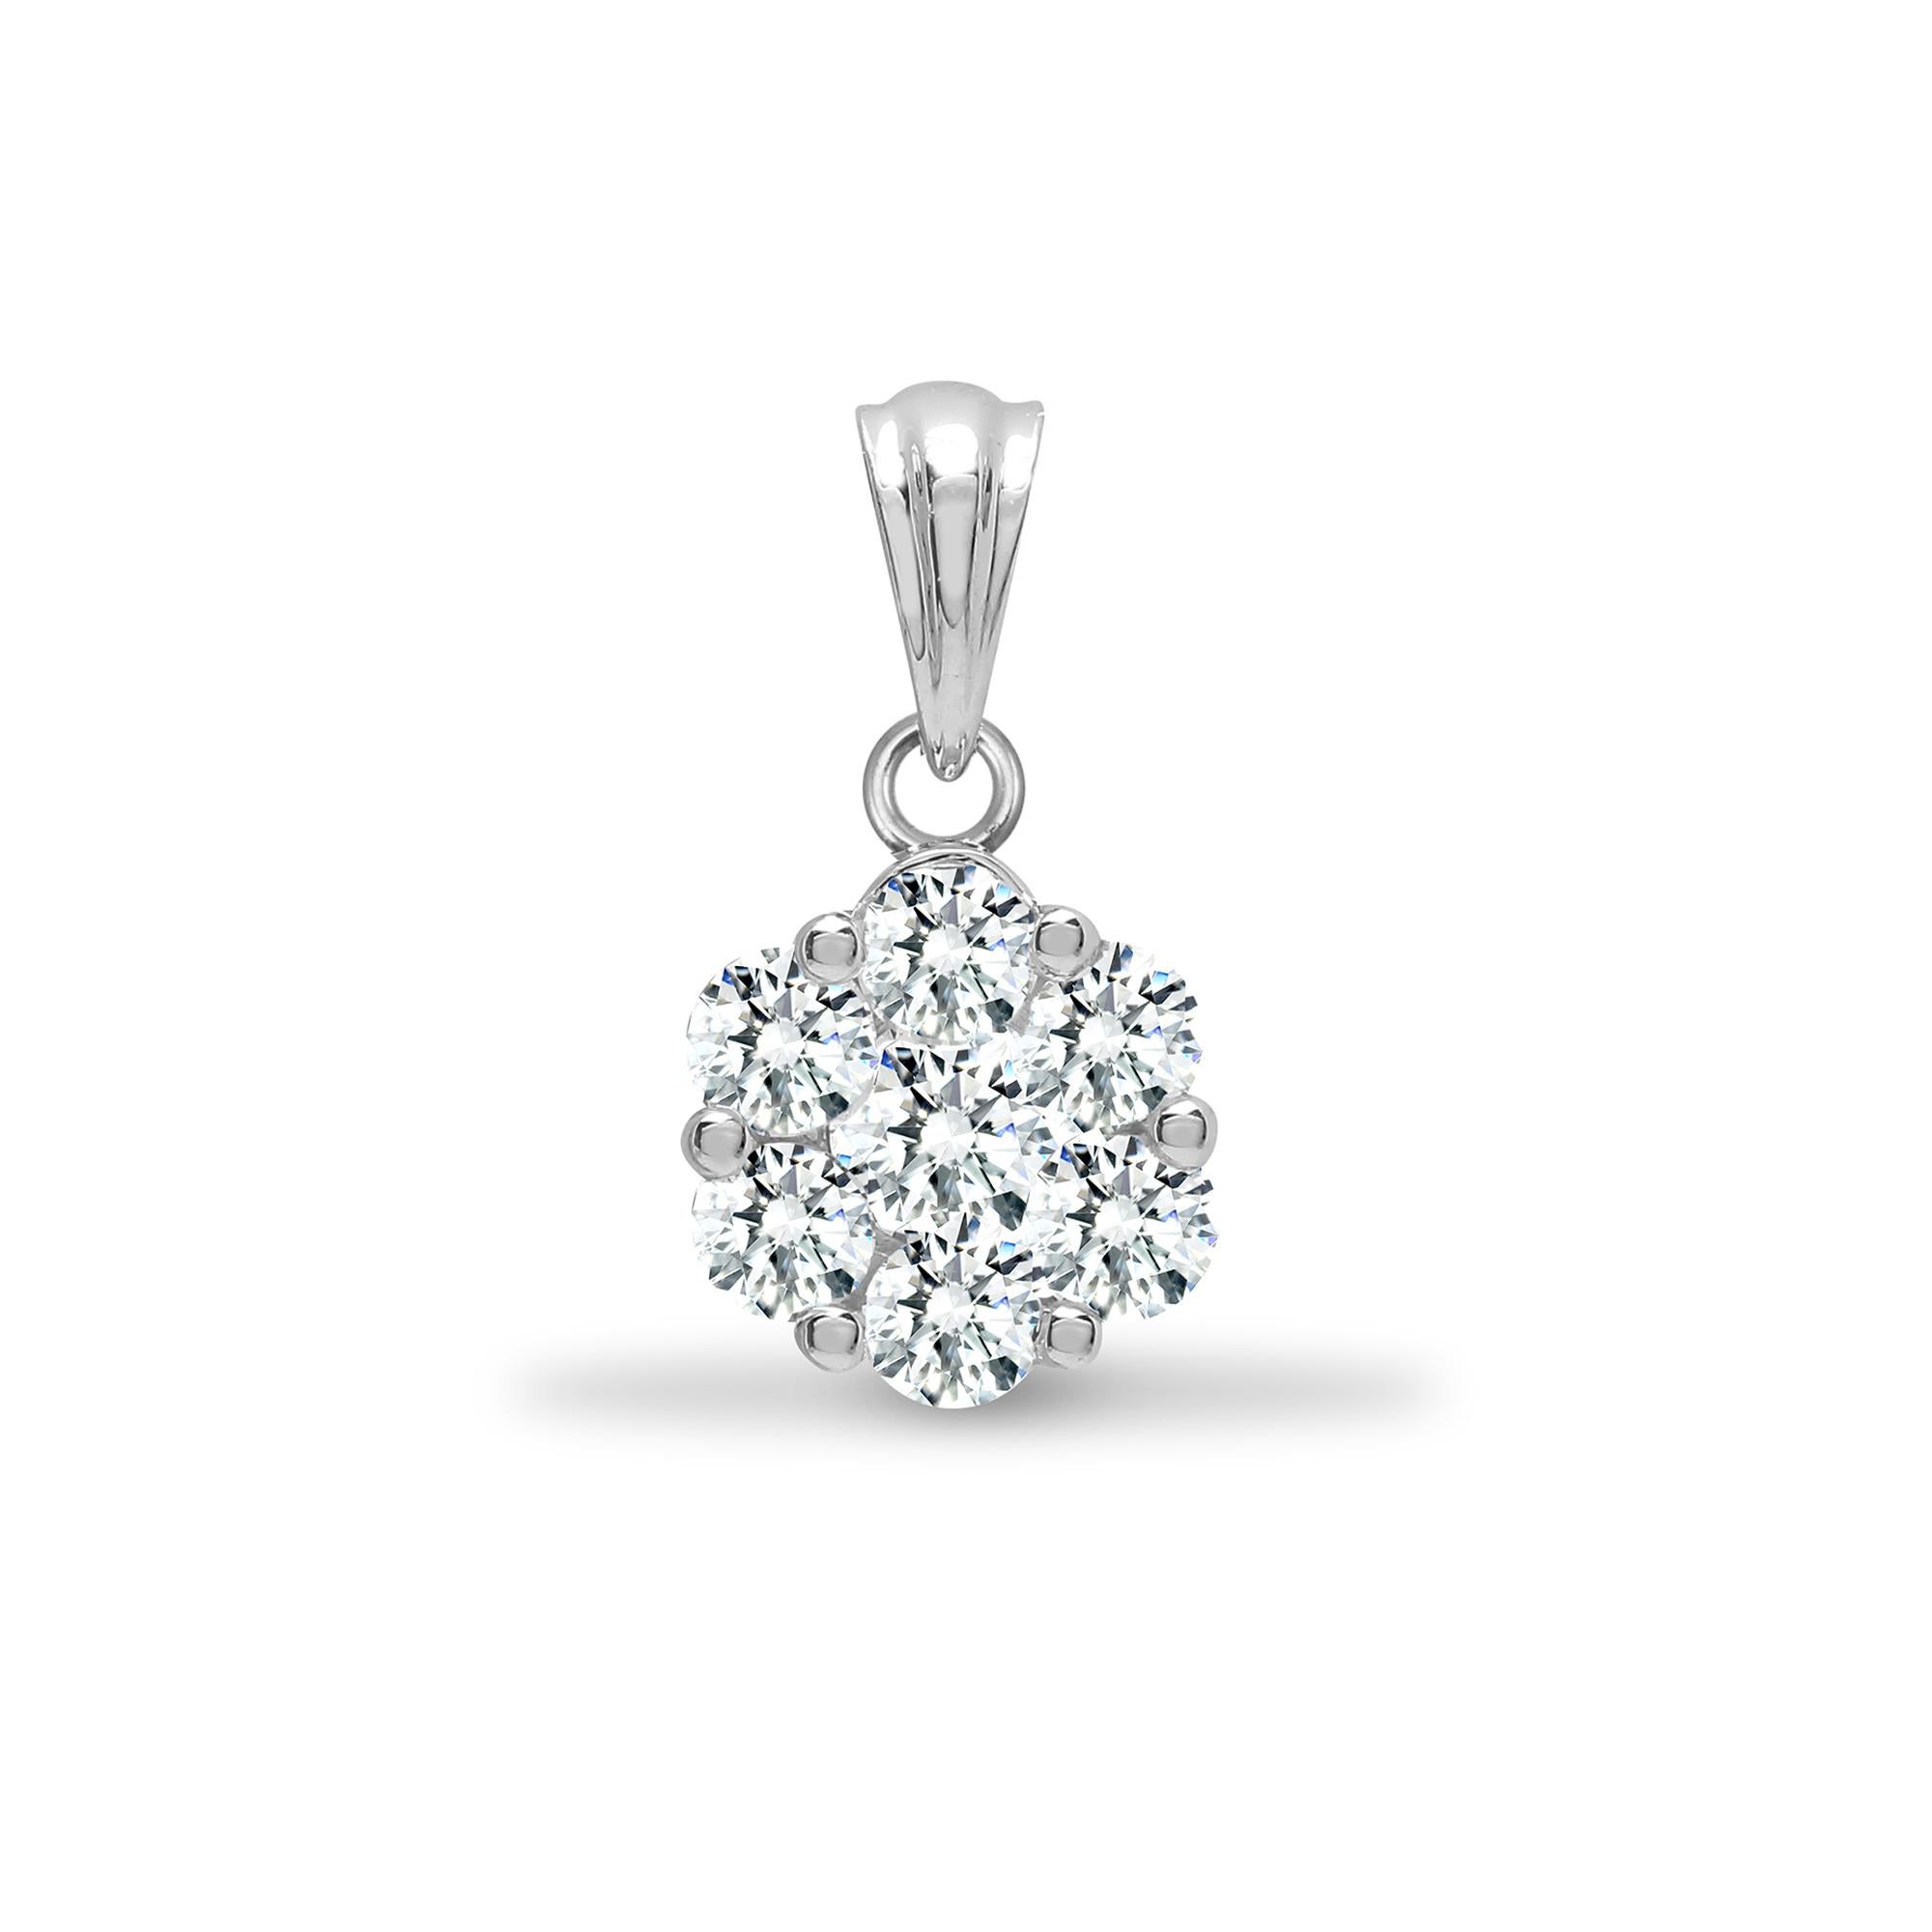 This Beautiful 0.33 Carat Flower design Cluster Diamond pendant features 7 round brilliant cut natural diamonds Color G/H Clarity SI1 Round White Diamonds. Comes with a stunning white gold necklace chain all set in 18 Karat white gold, suitable for